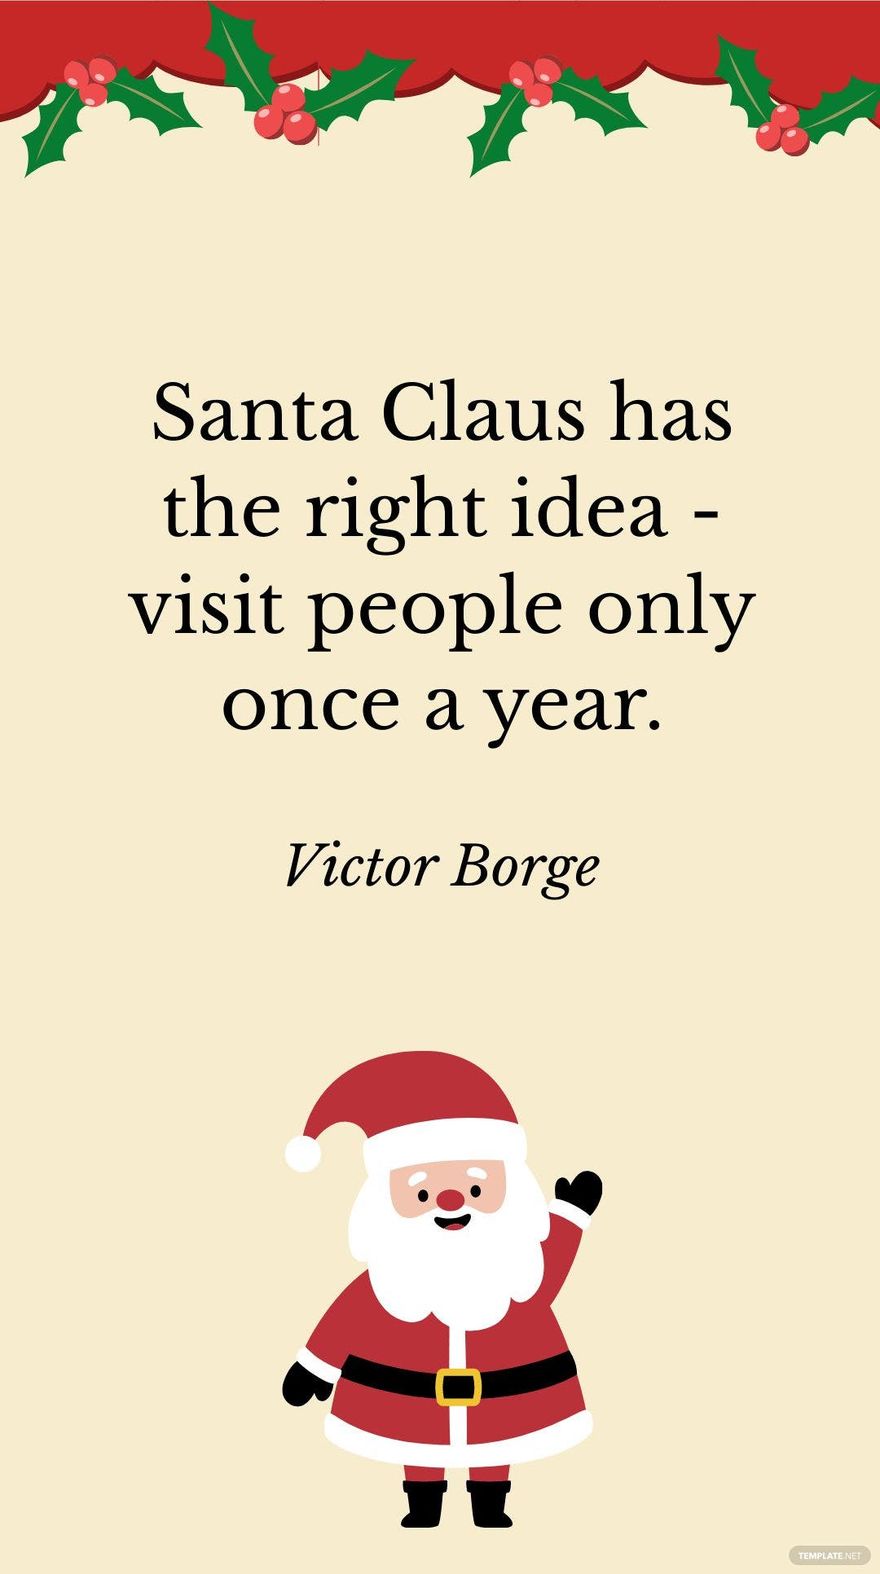 Free Victor Borge - Santa Claus has the right idea - visit people only once a year. in JPG